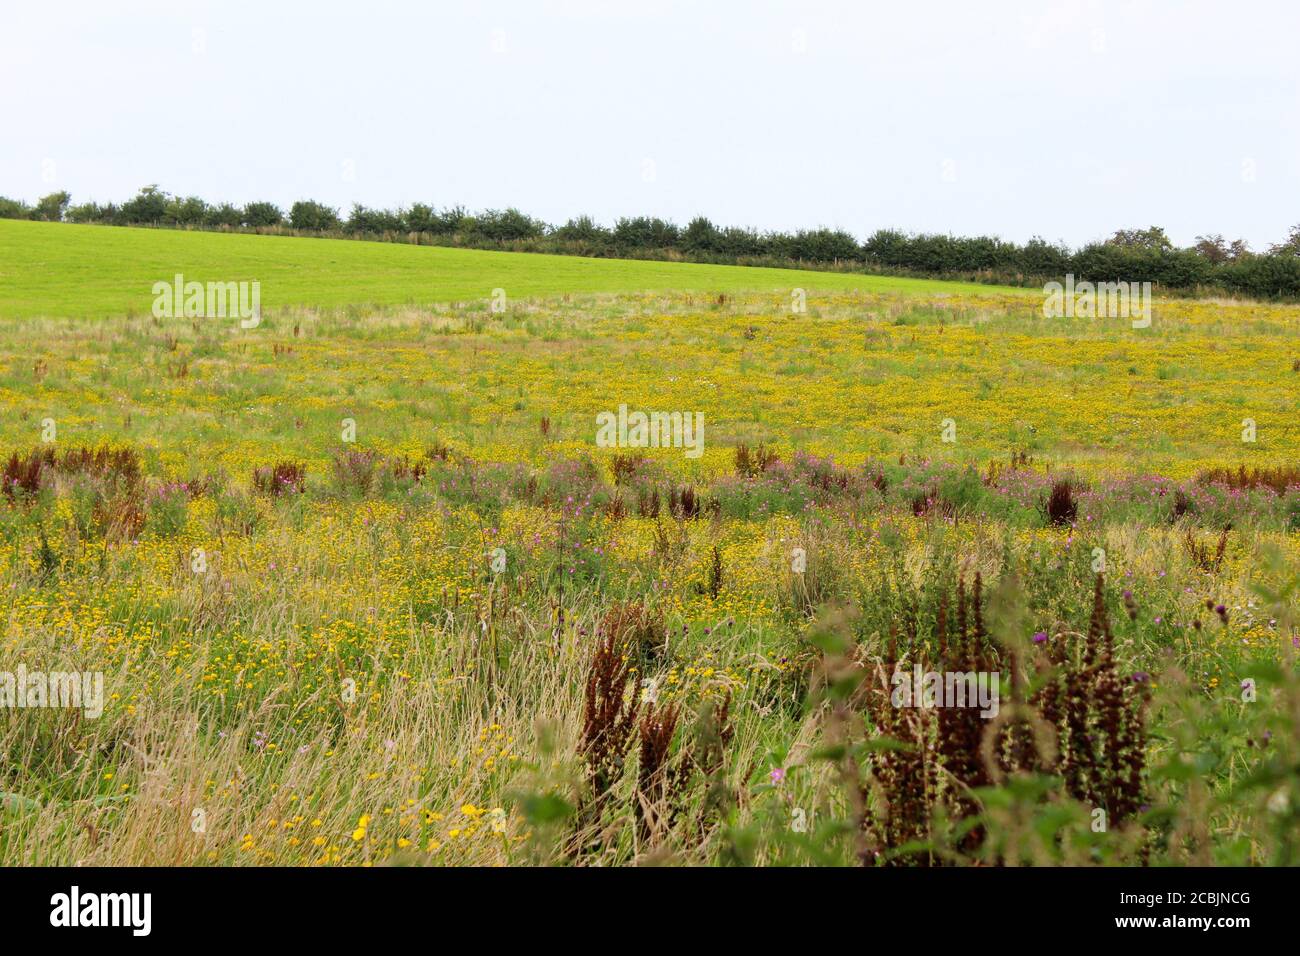 Wild grassland field meadow with wild plants and yellow flowers in Pickmere, England Stock Photo